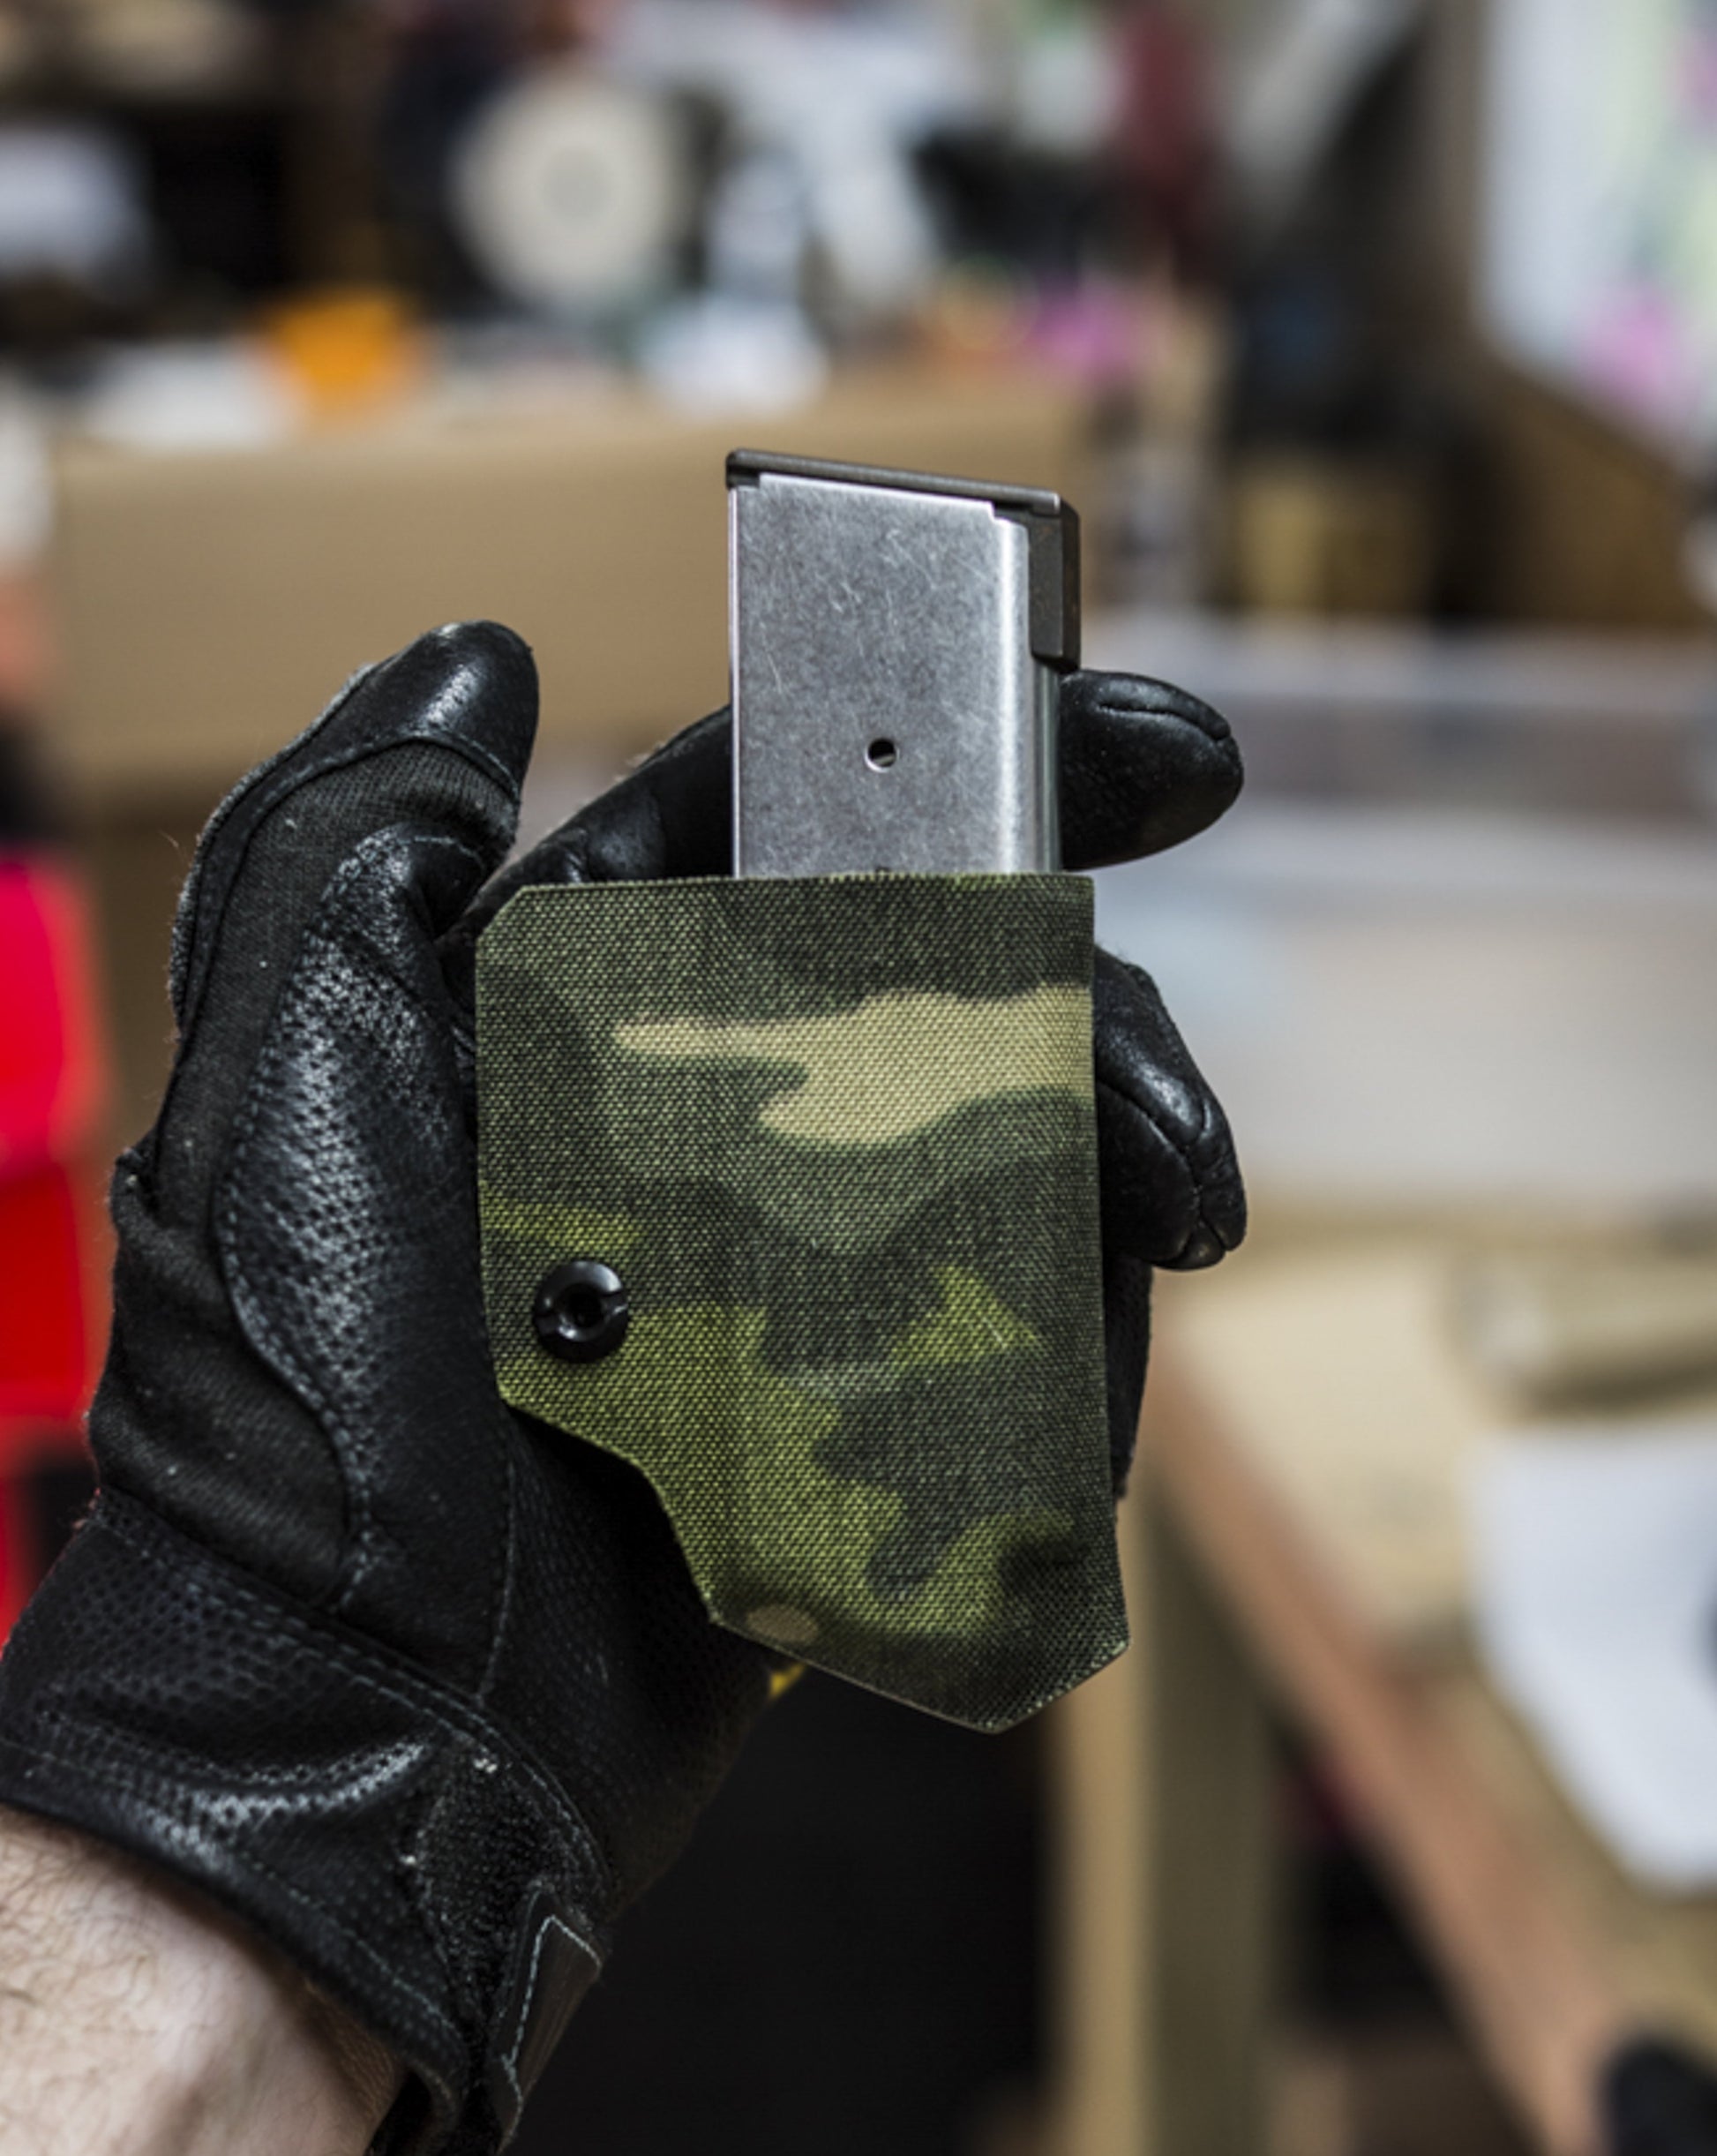 IWB Magazine Carrier for a 1911 in Multicam Tropic fabric covered Kydex.